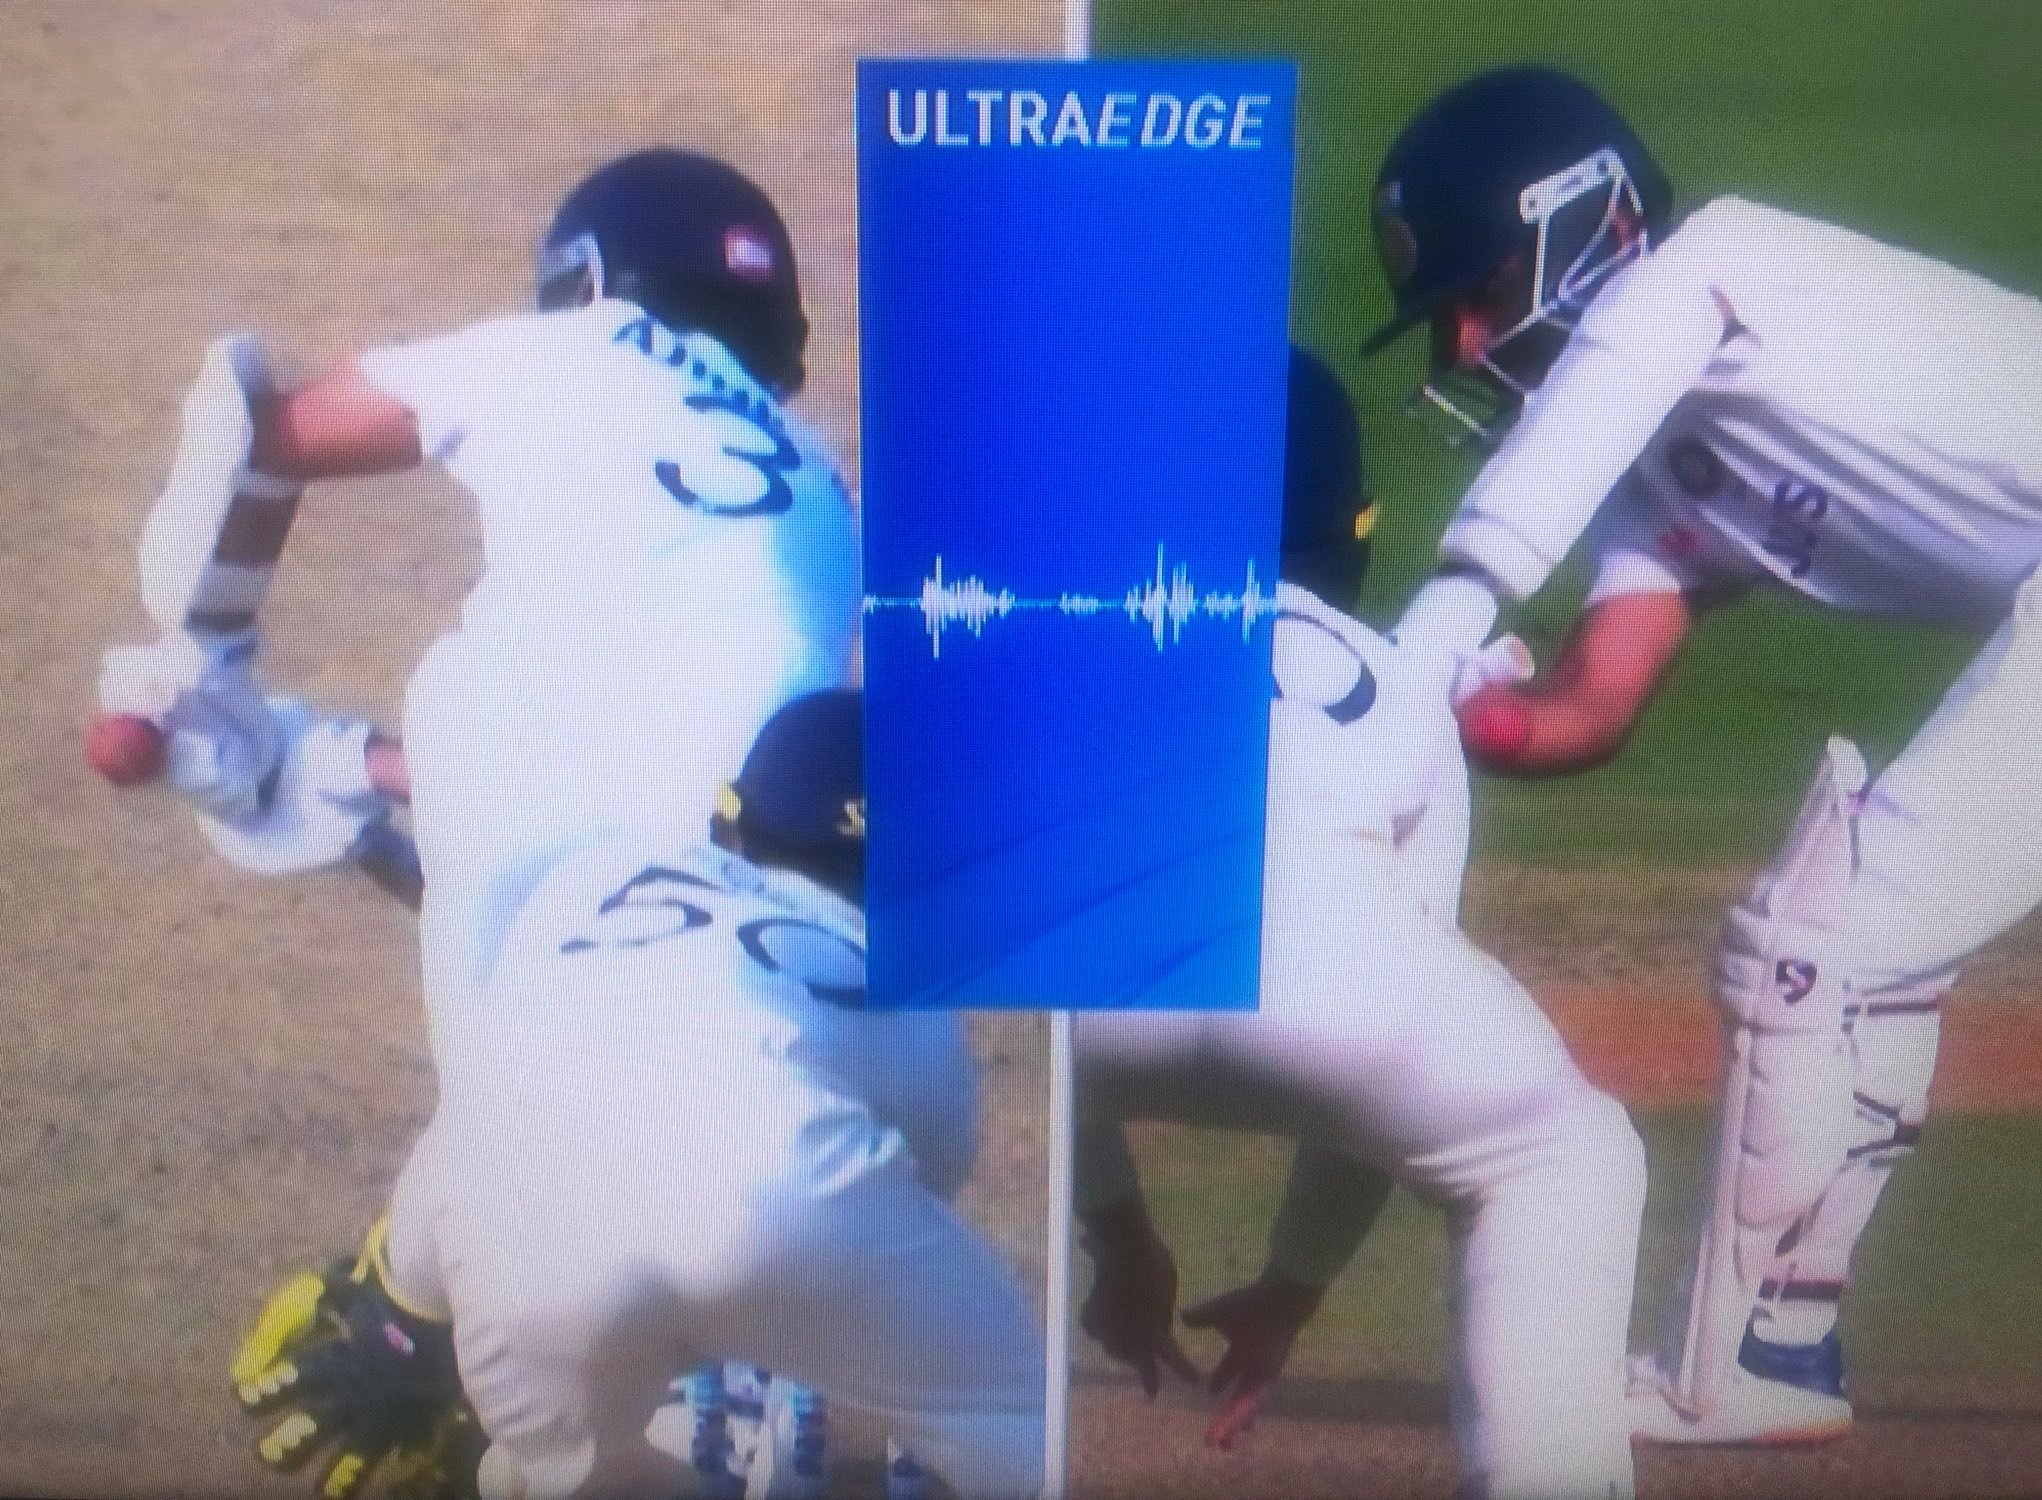 Rahane was given not out despite brushing the ball with gloves | Twitter